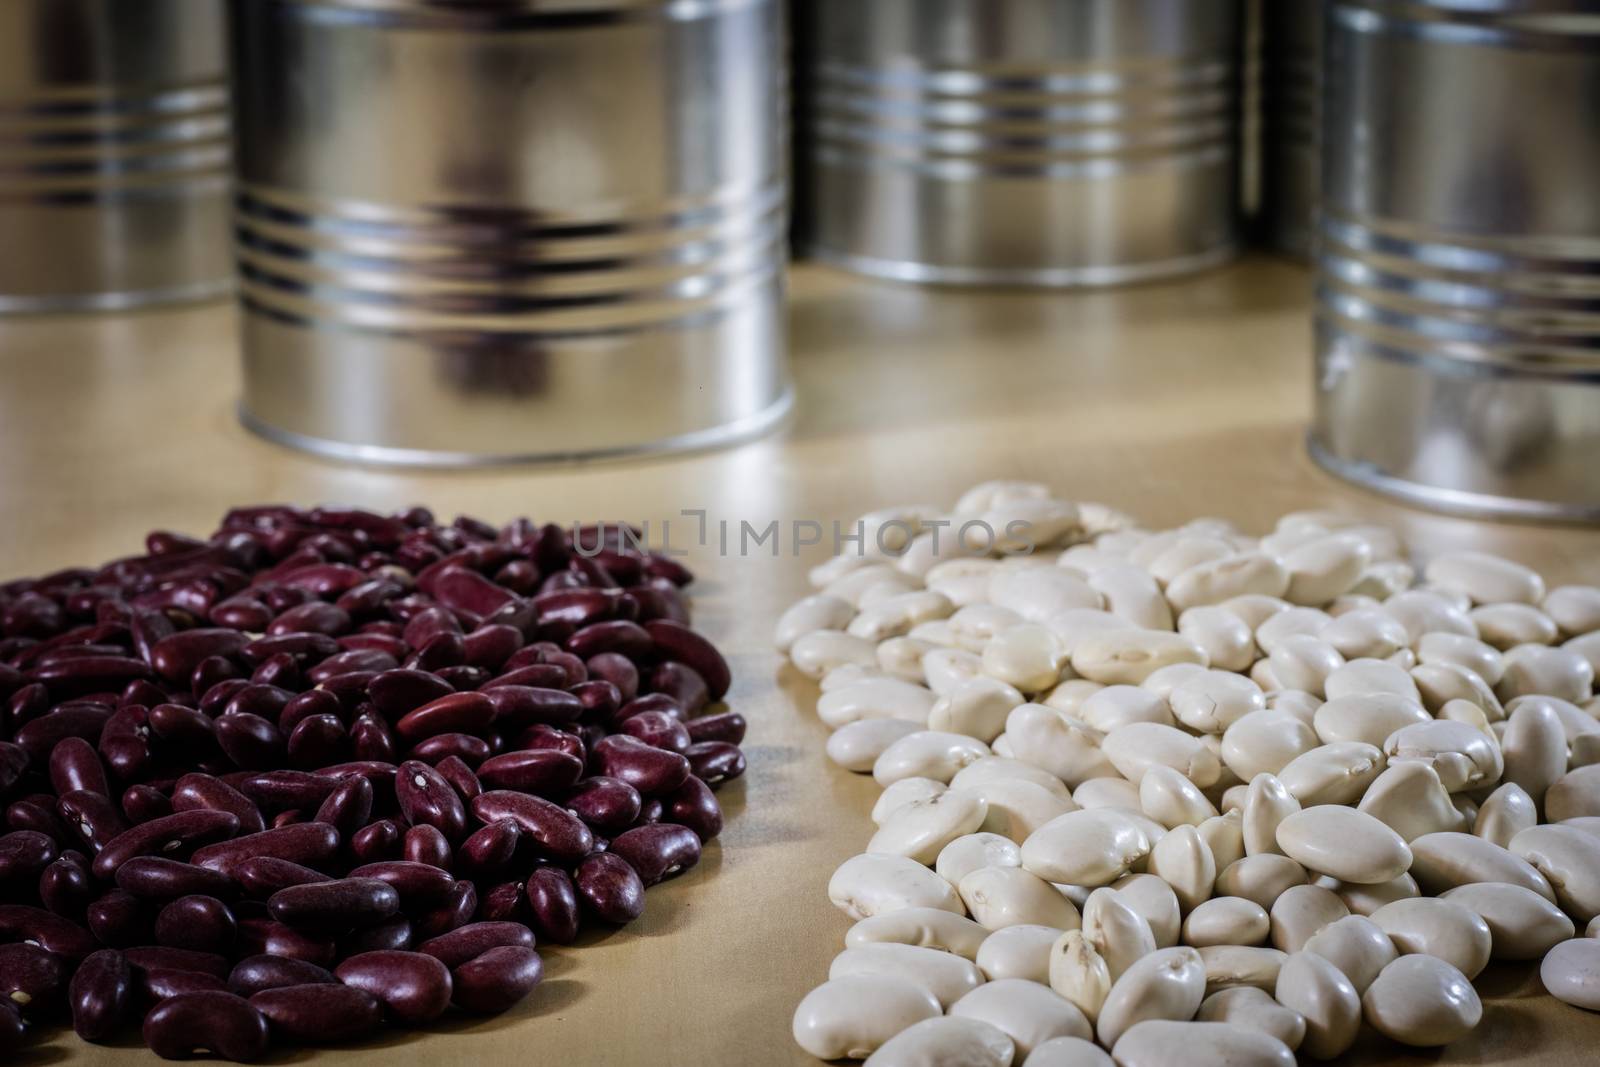 Delicious beans in a metal jar on a wooden kitchen table. Black background.